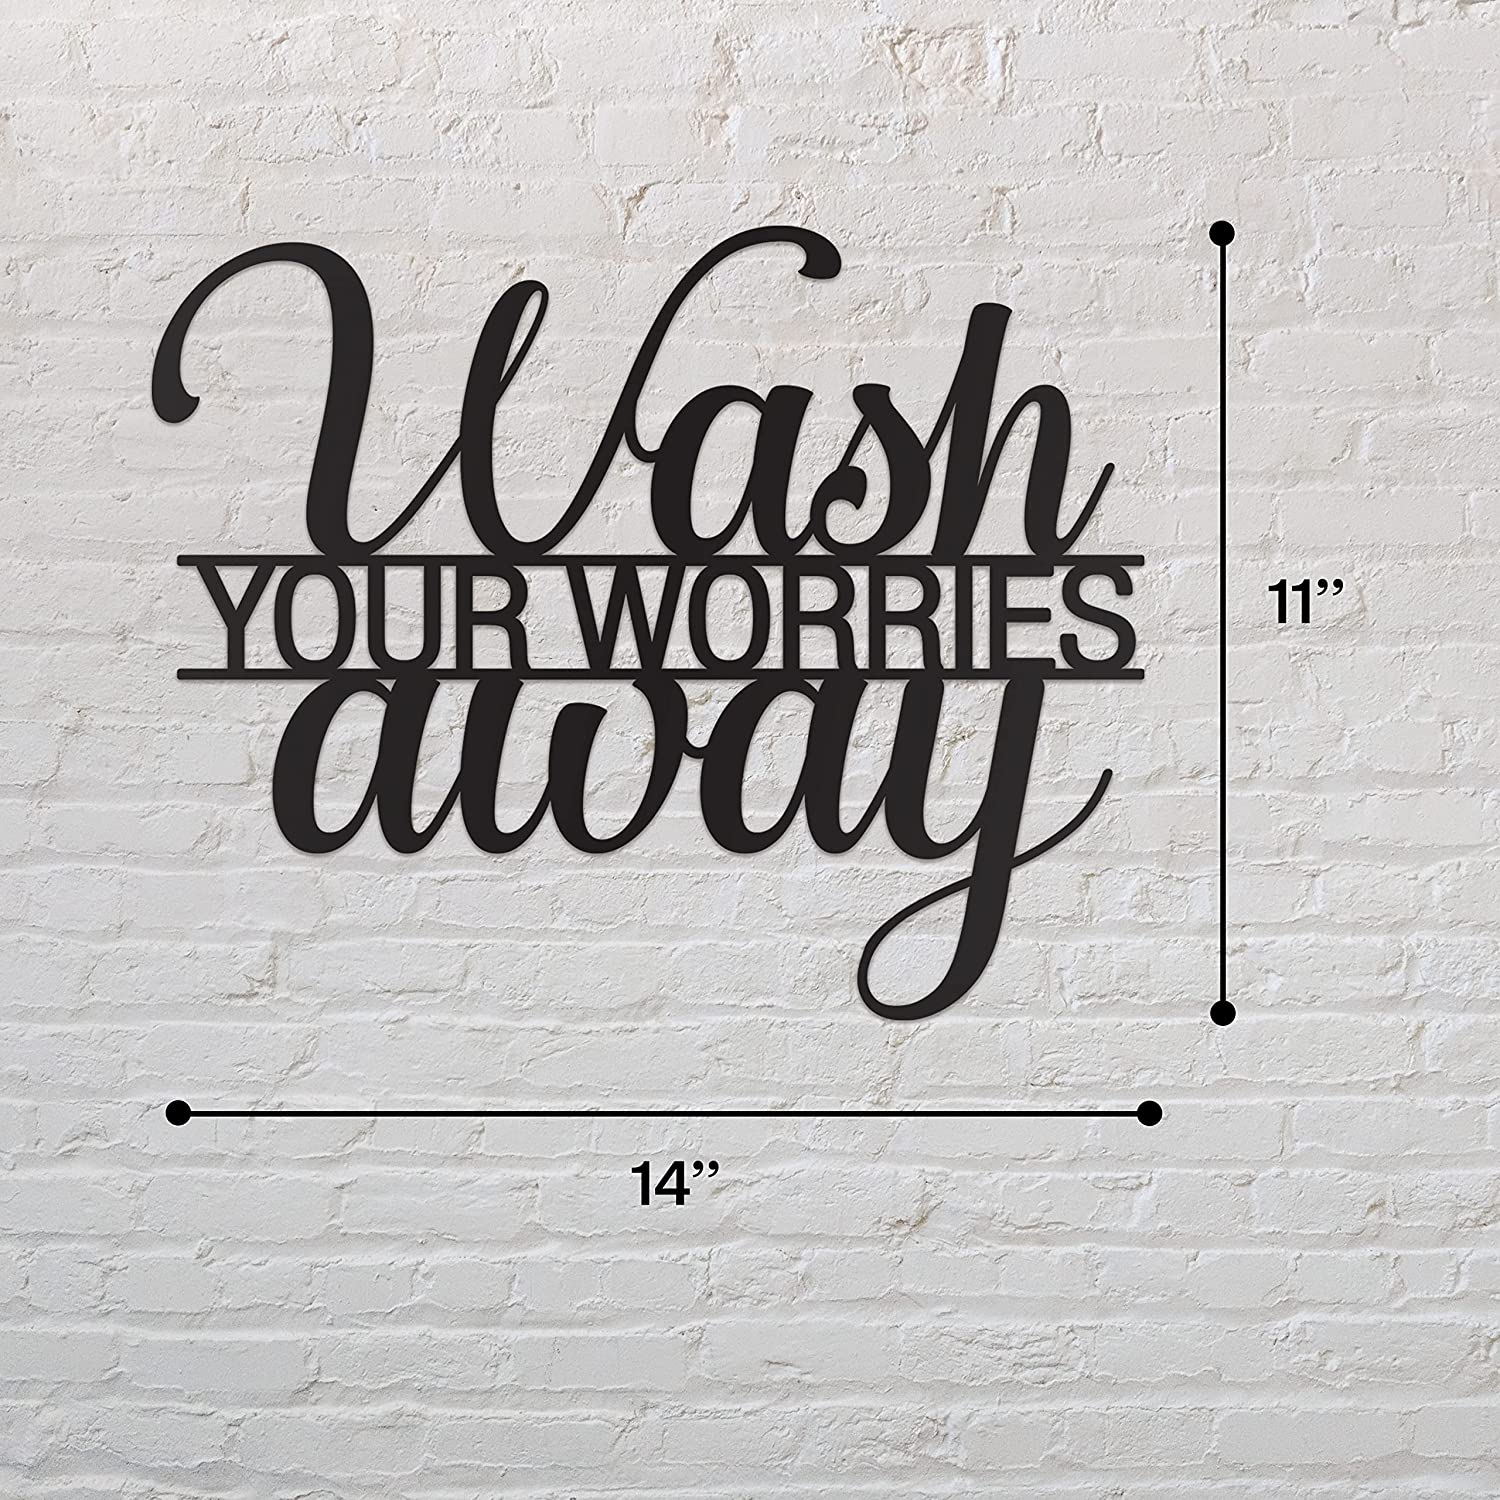 Wash Your Worries Away Sign Metal Wall Decor - 14"X11" Black Modern Beautiful Wash Your Worries Away Farmhouse Metal Wall Signs